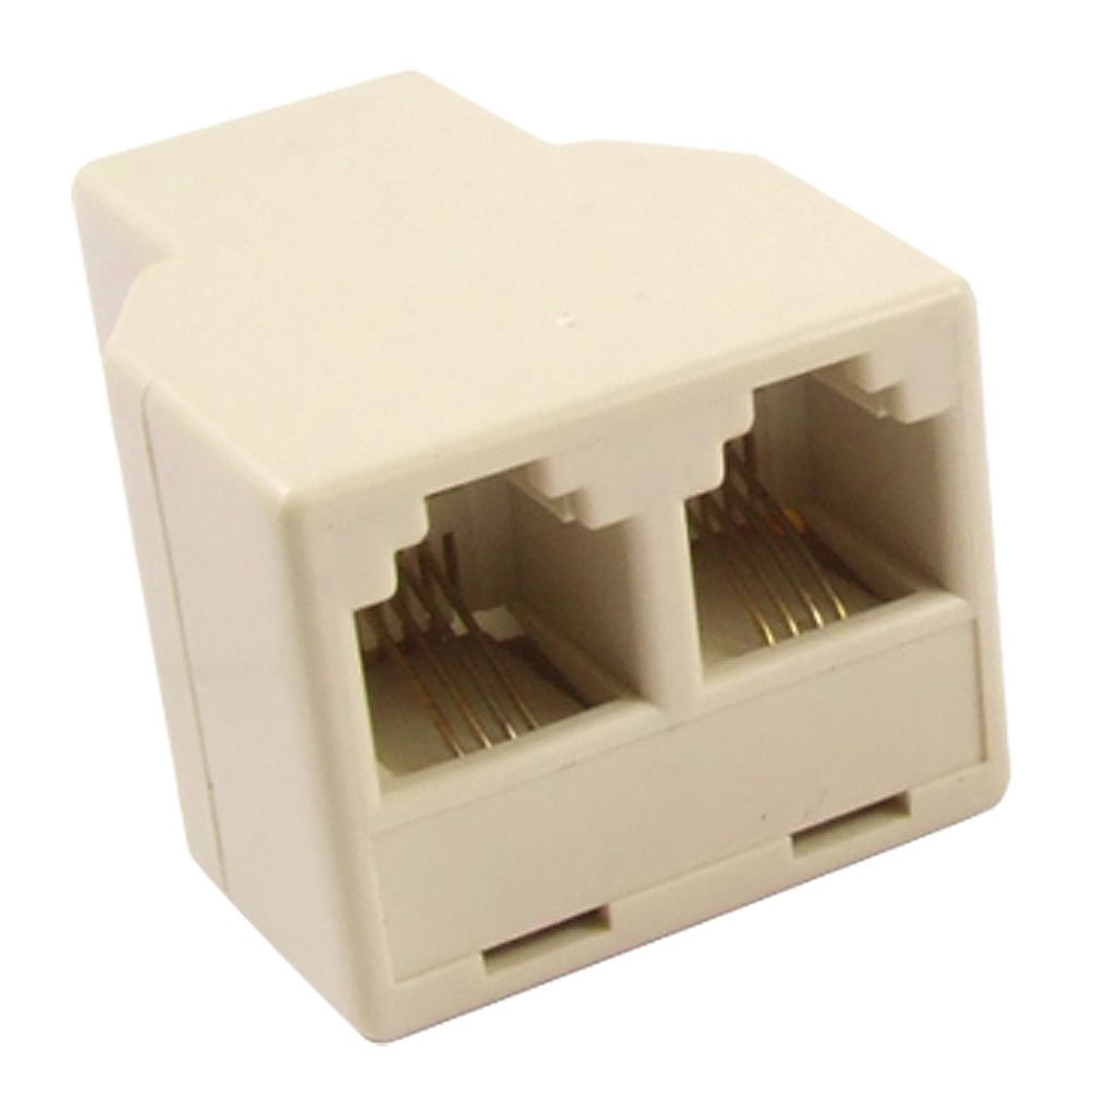 Promotion! RJ11 4 Pins Female 1 to 2 Telephone Splitter Connector Adapter